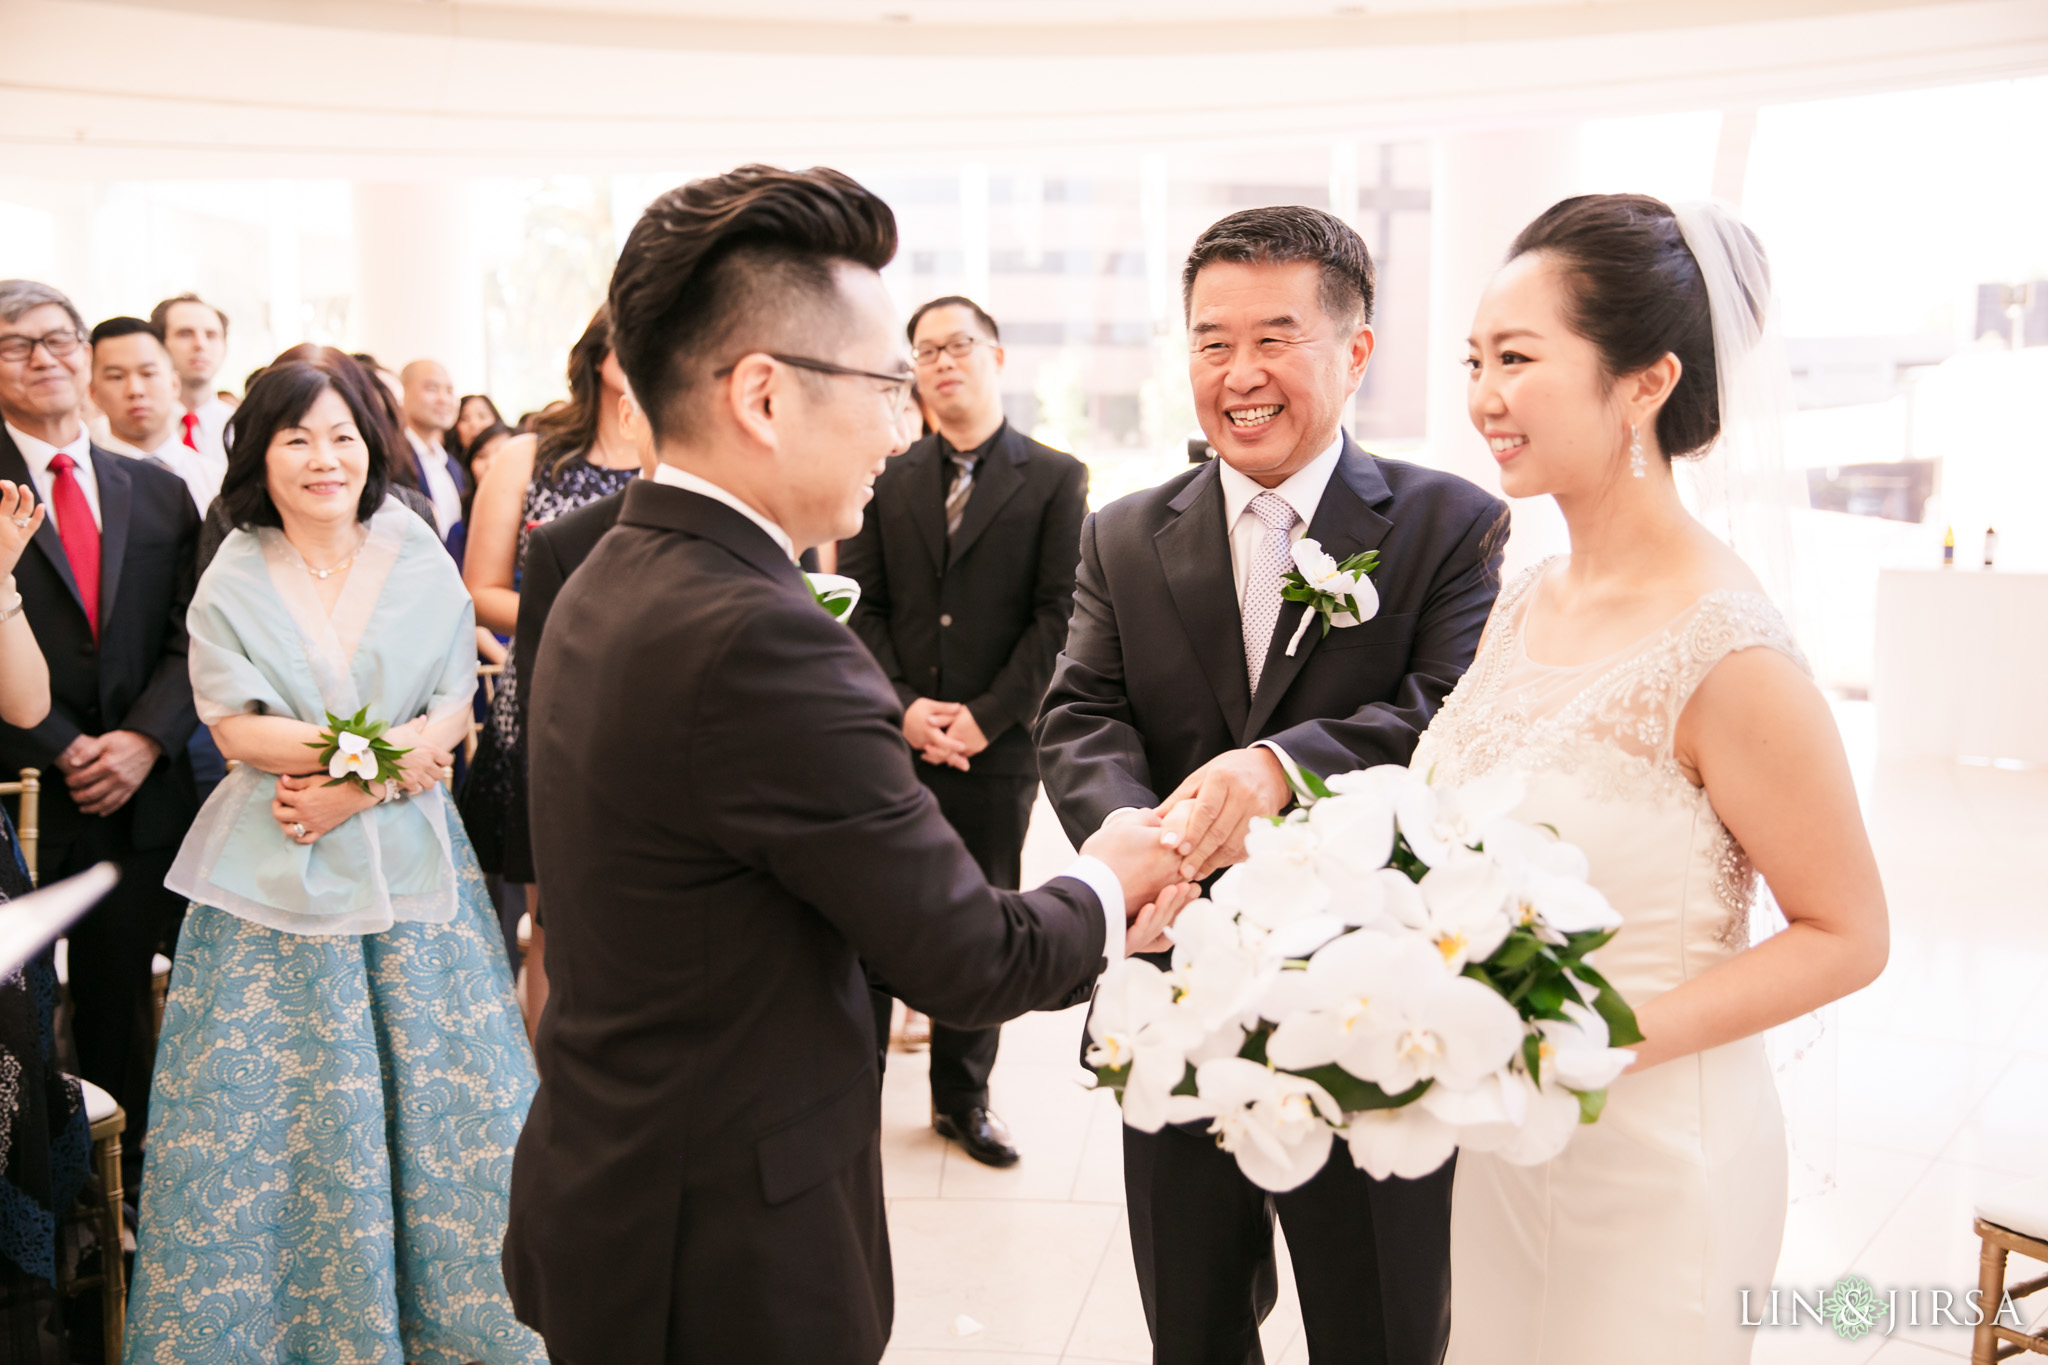 24 segerstrom center for the arts costa mesa wedding photography